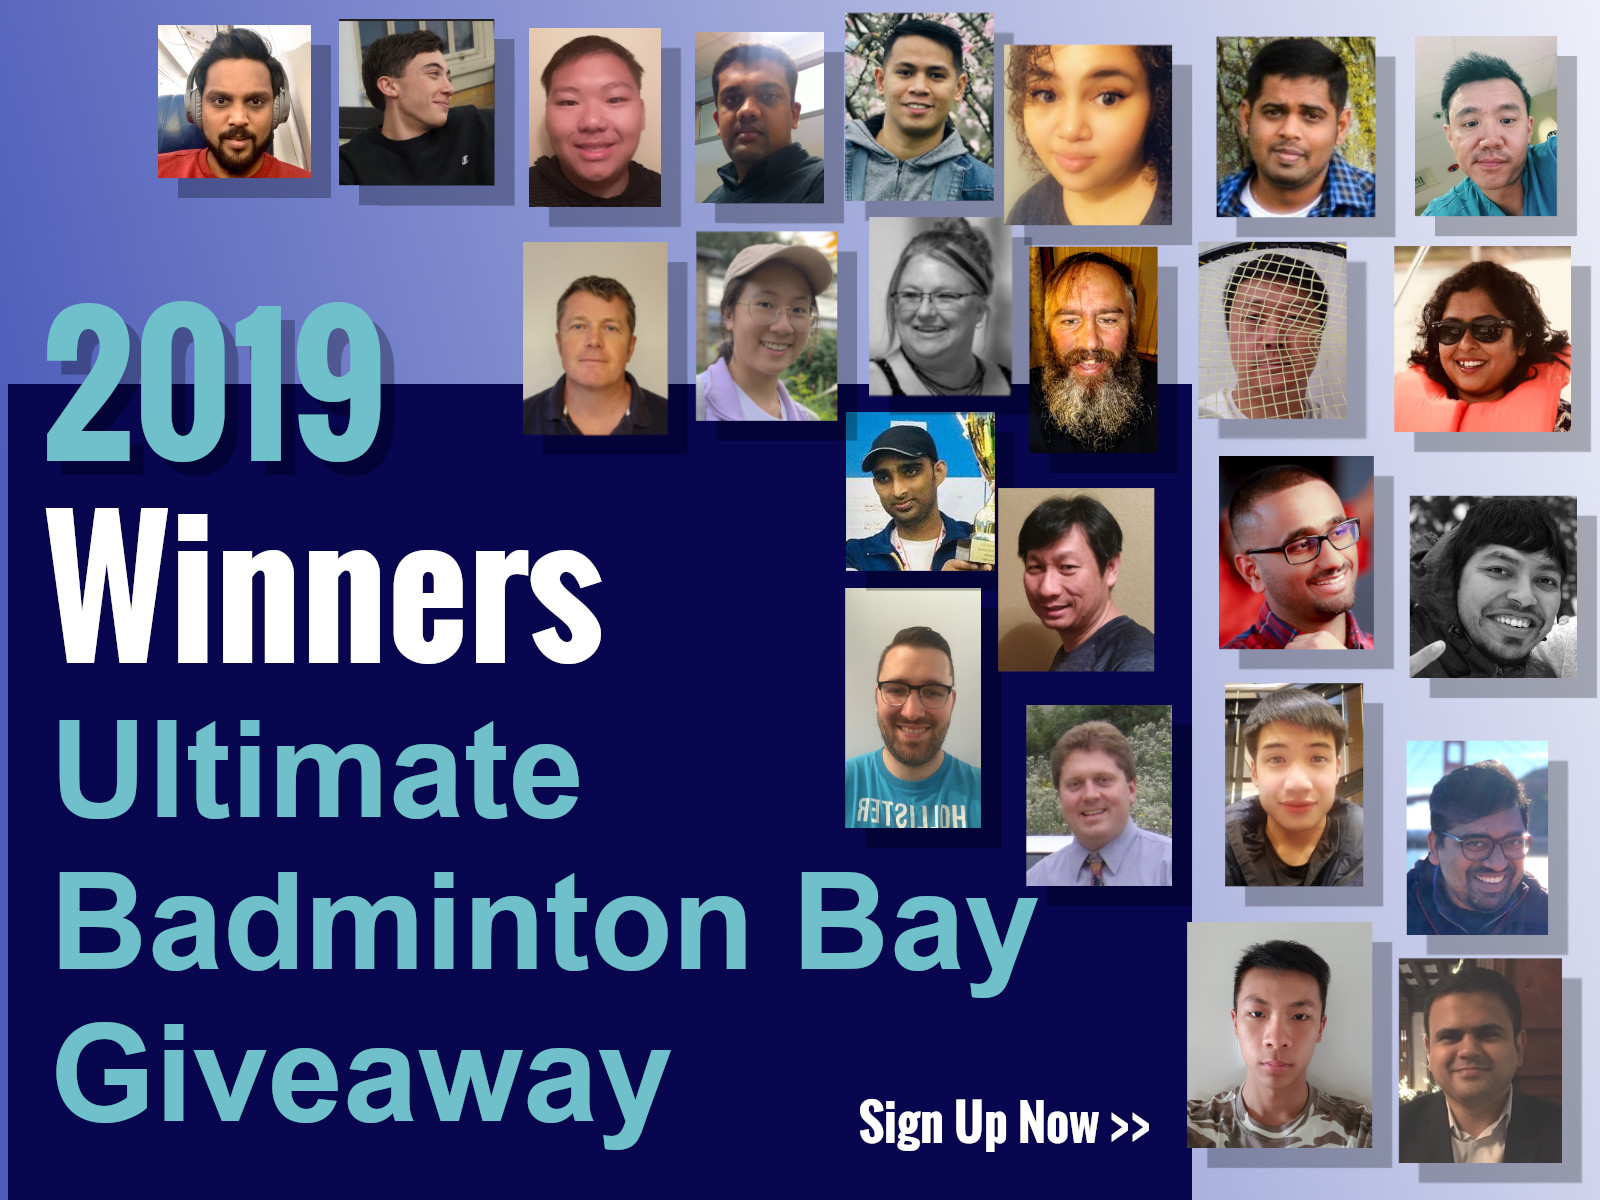 2019 Winners Ultimate Badminton Bay Giveaway - Sign up now>>